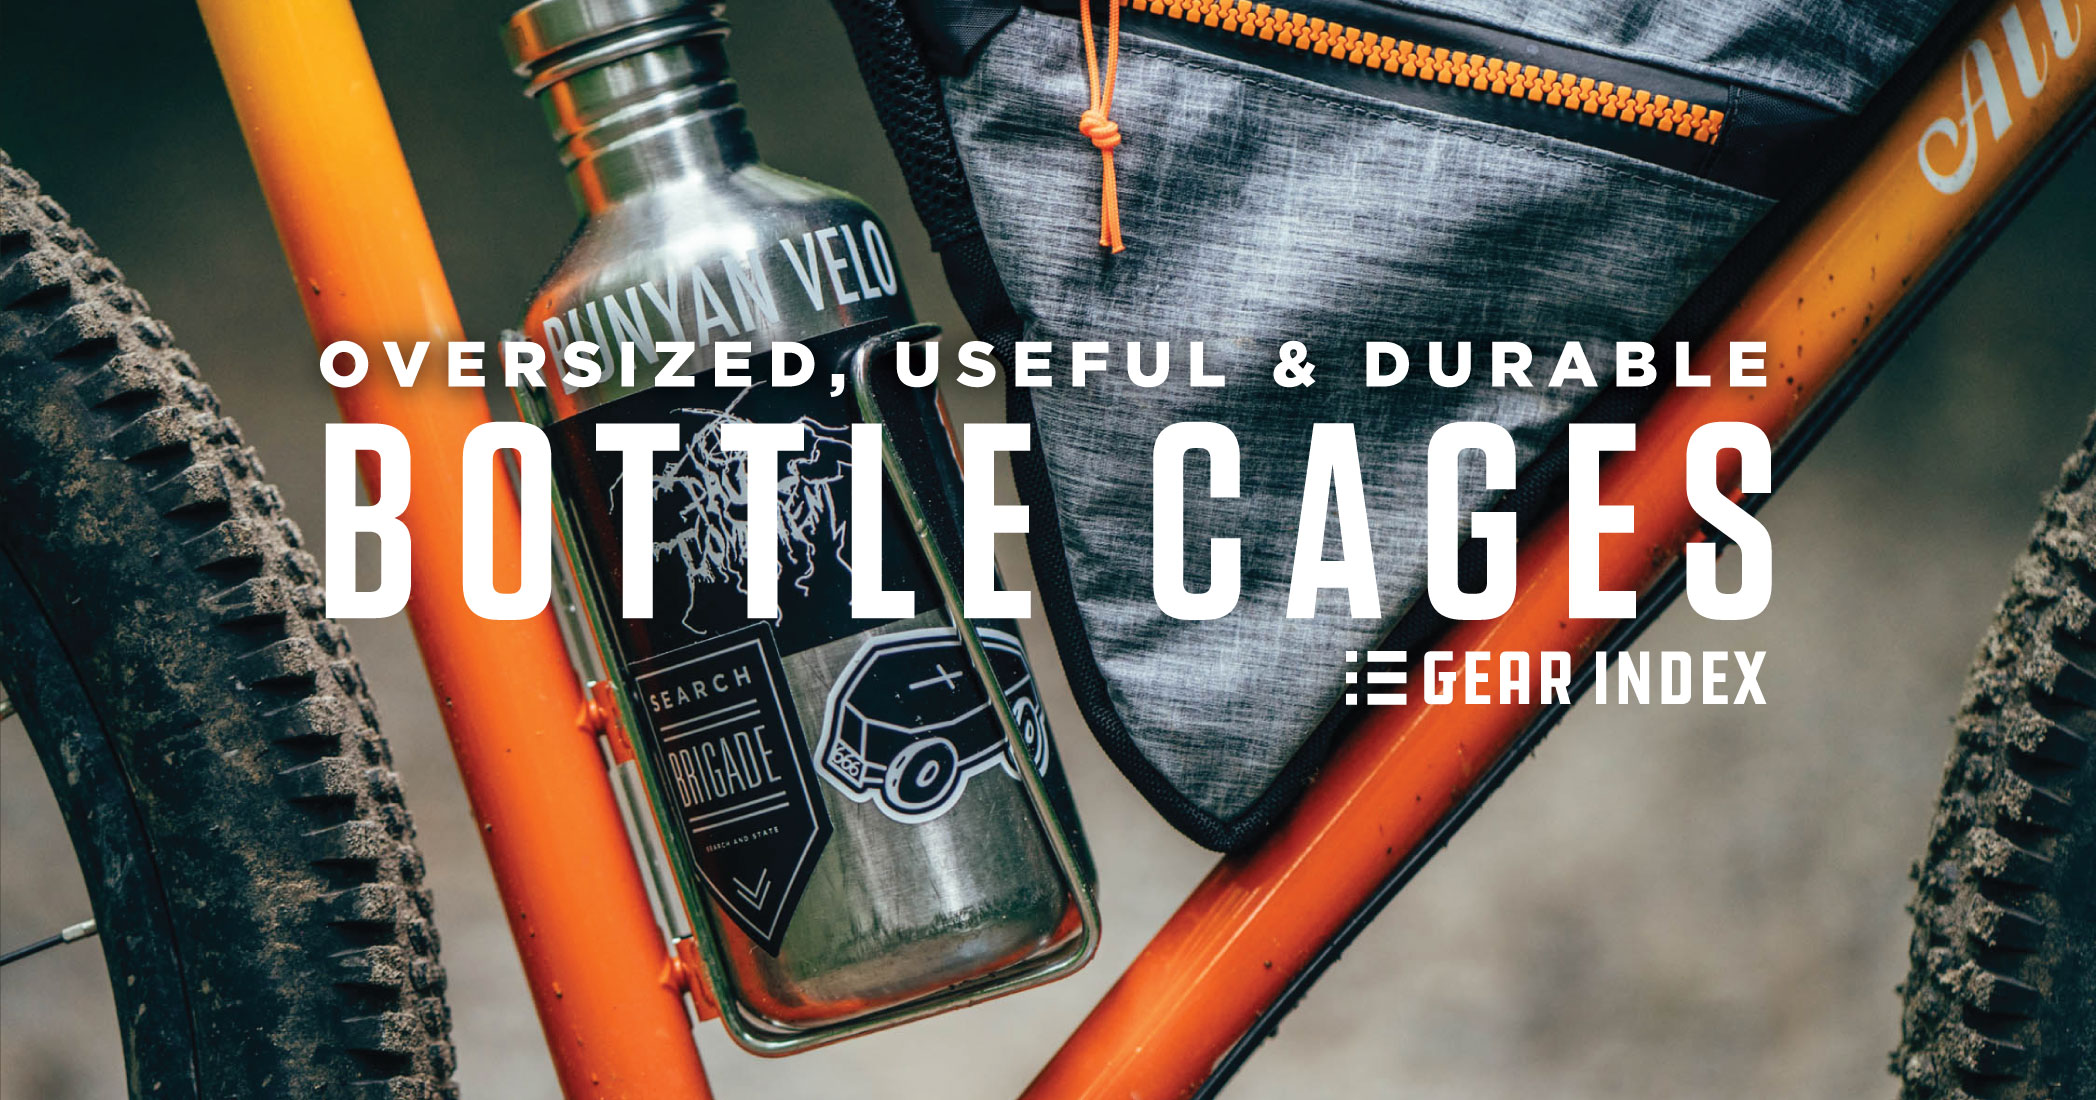 Bottle Cages for bikepacking and bike touring